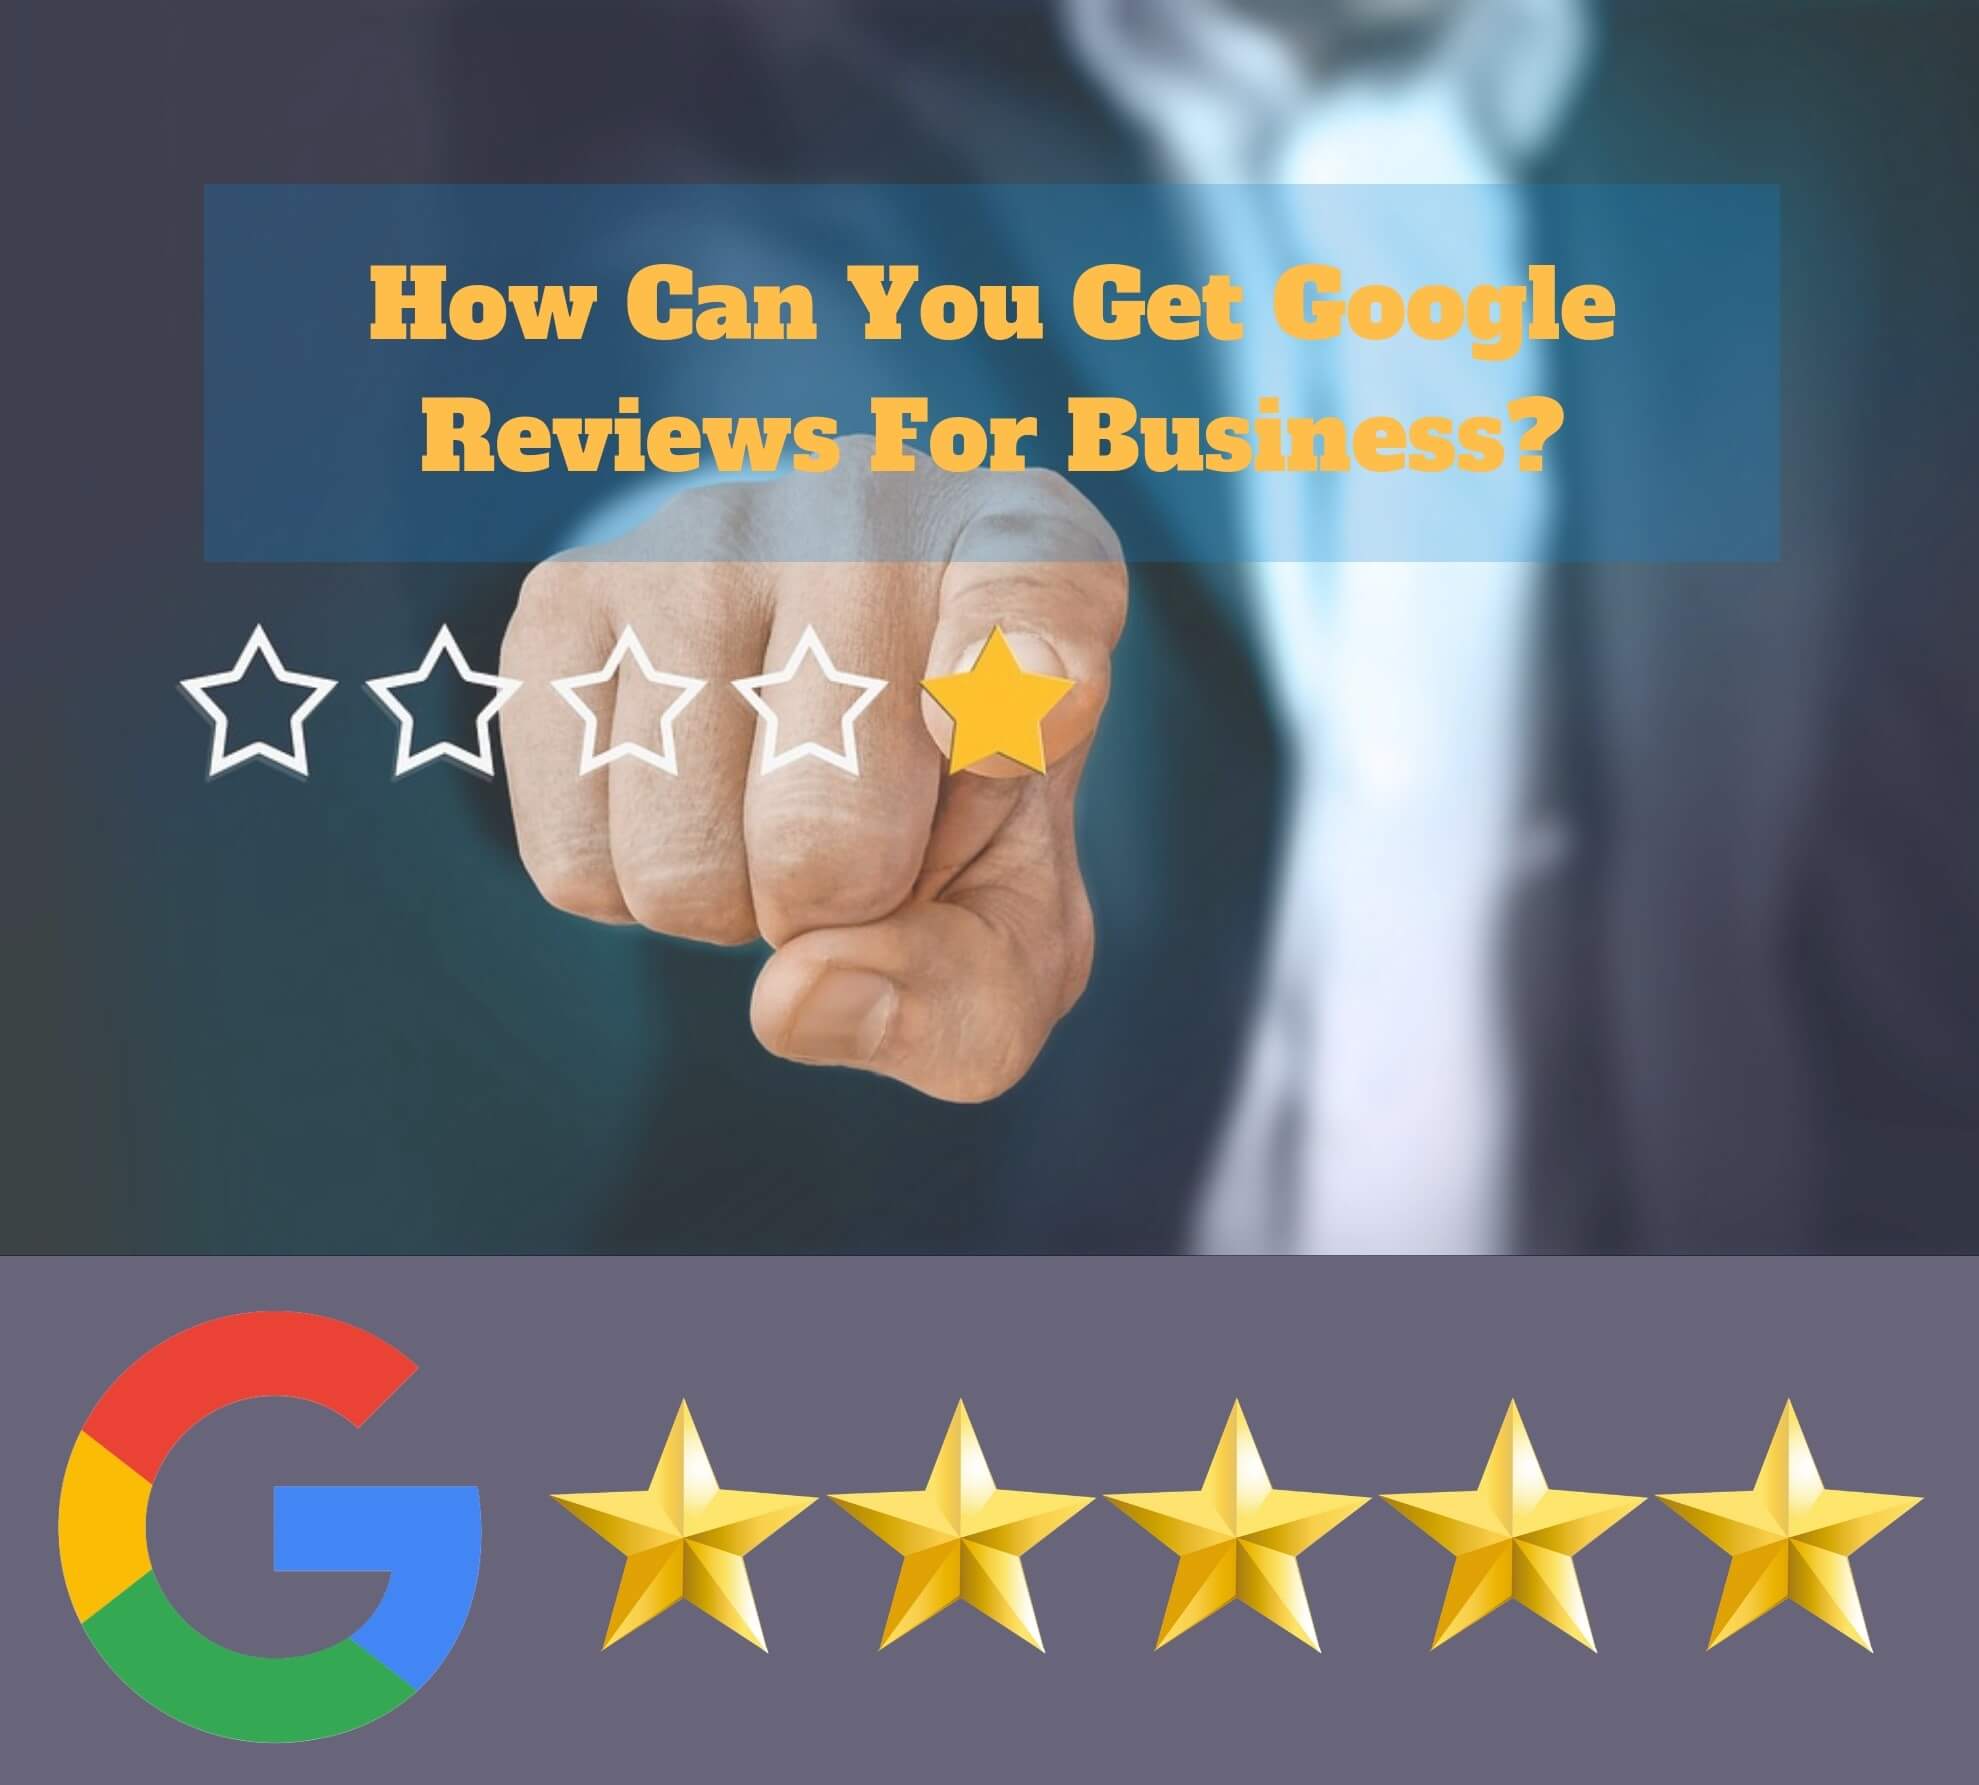 How can I get Google reviews for my business